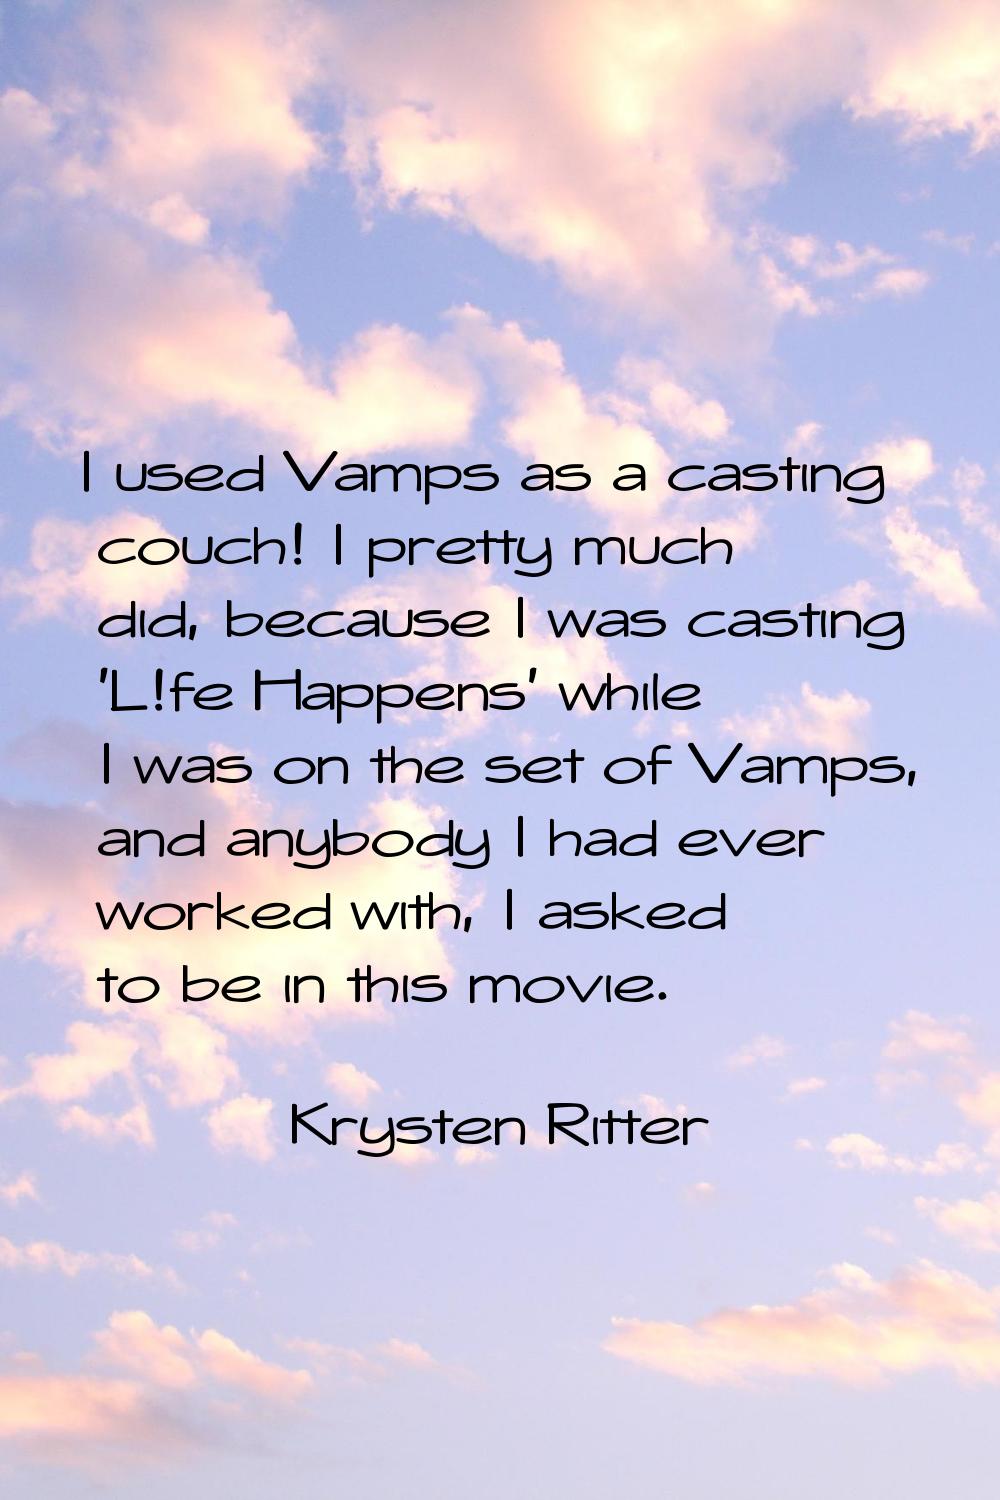 I used Vamps as a casting couch! I pretty much did, because I was casting 'L!fe Happens' while I wa